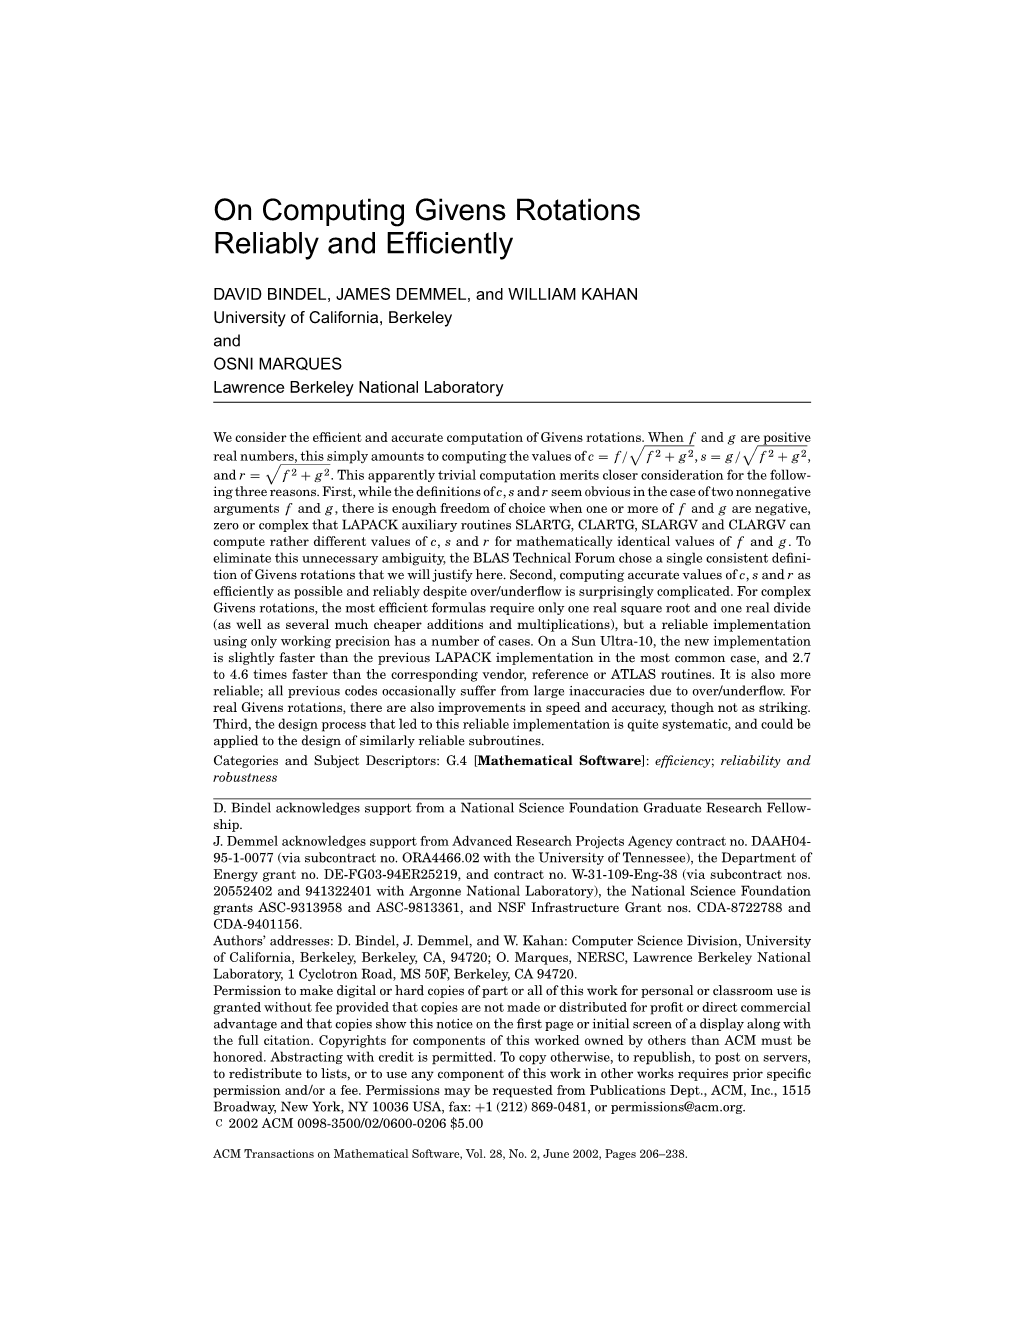 On Computing Givens Rotations Reliably and Efficiently